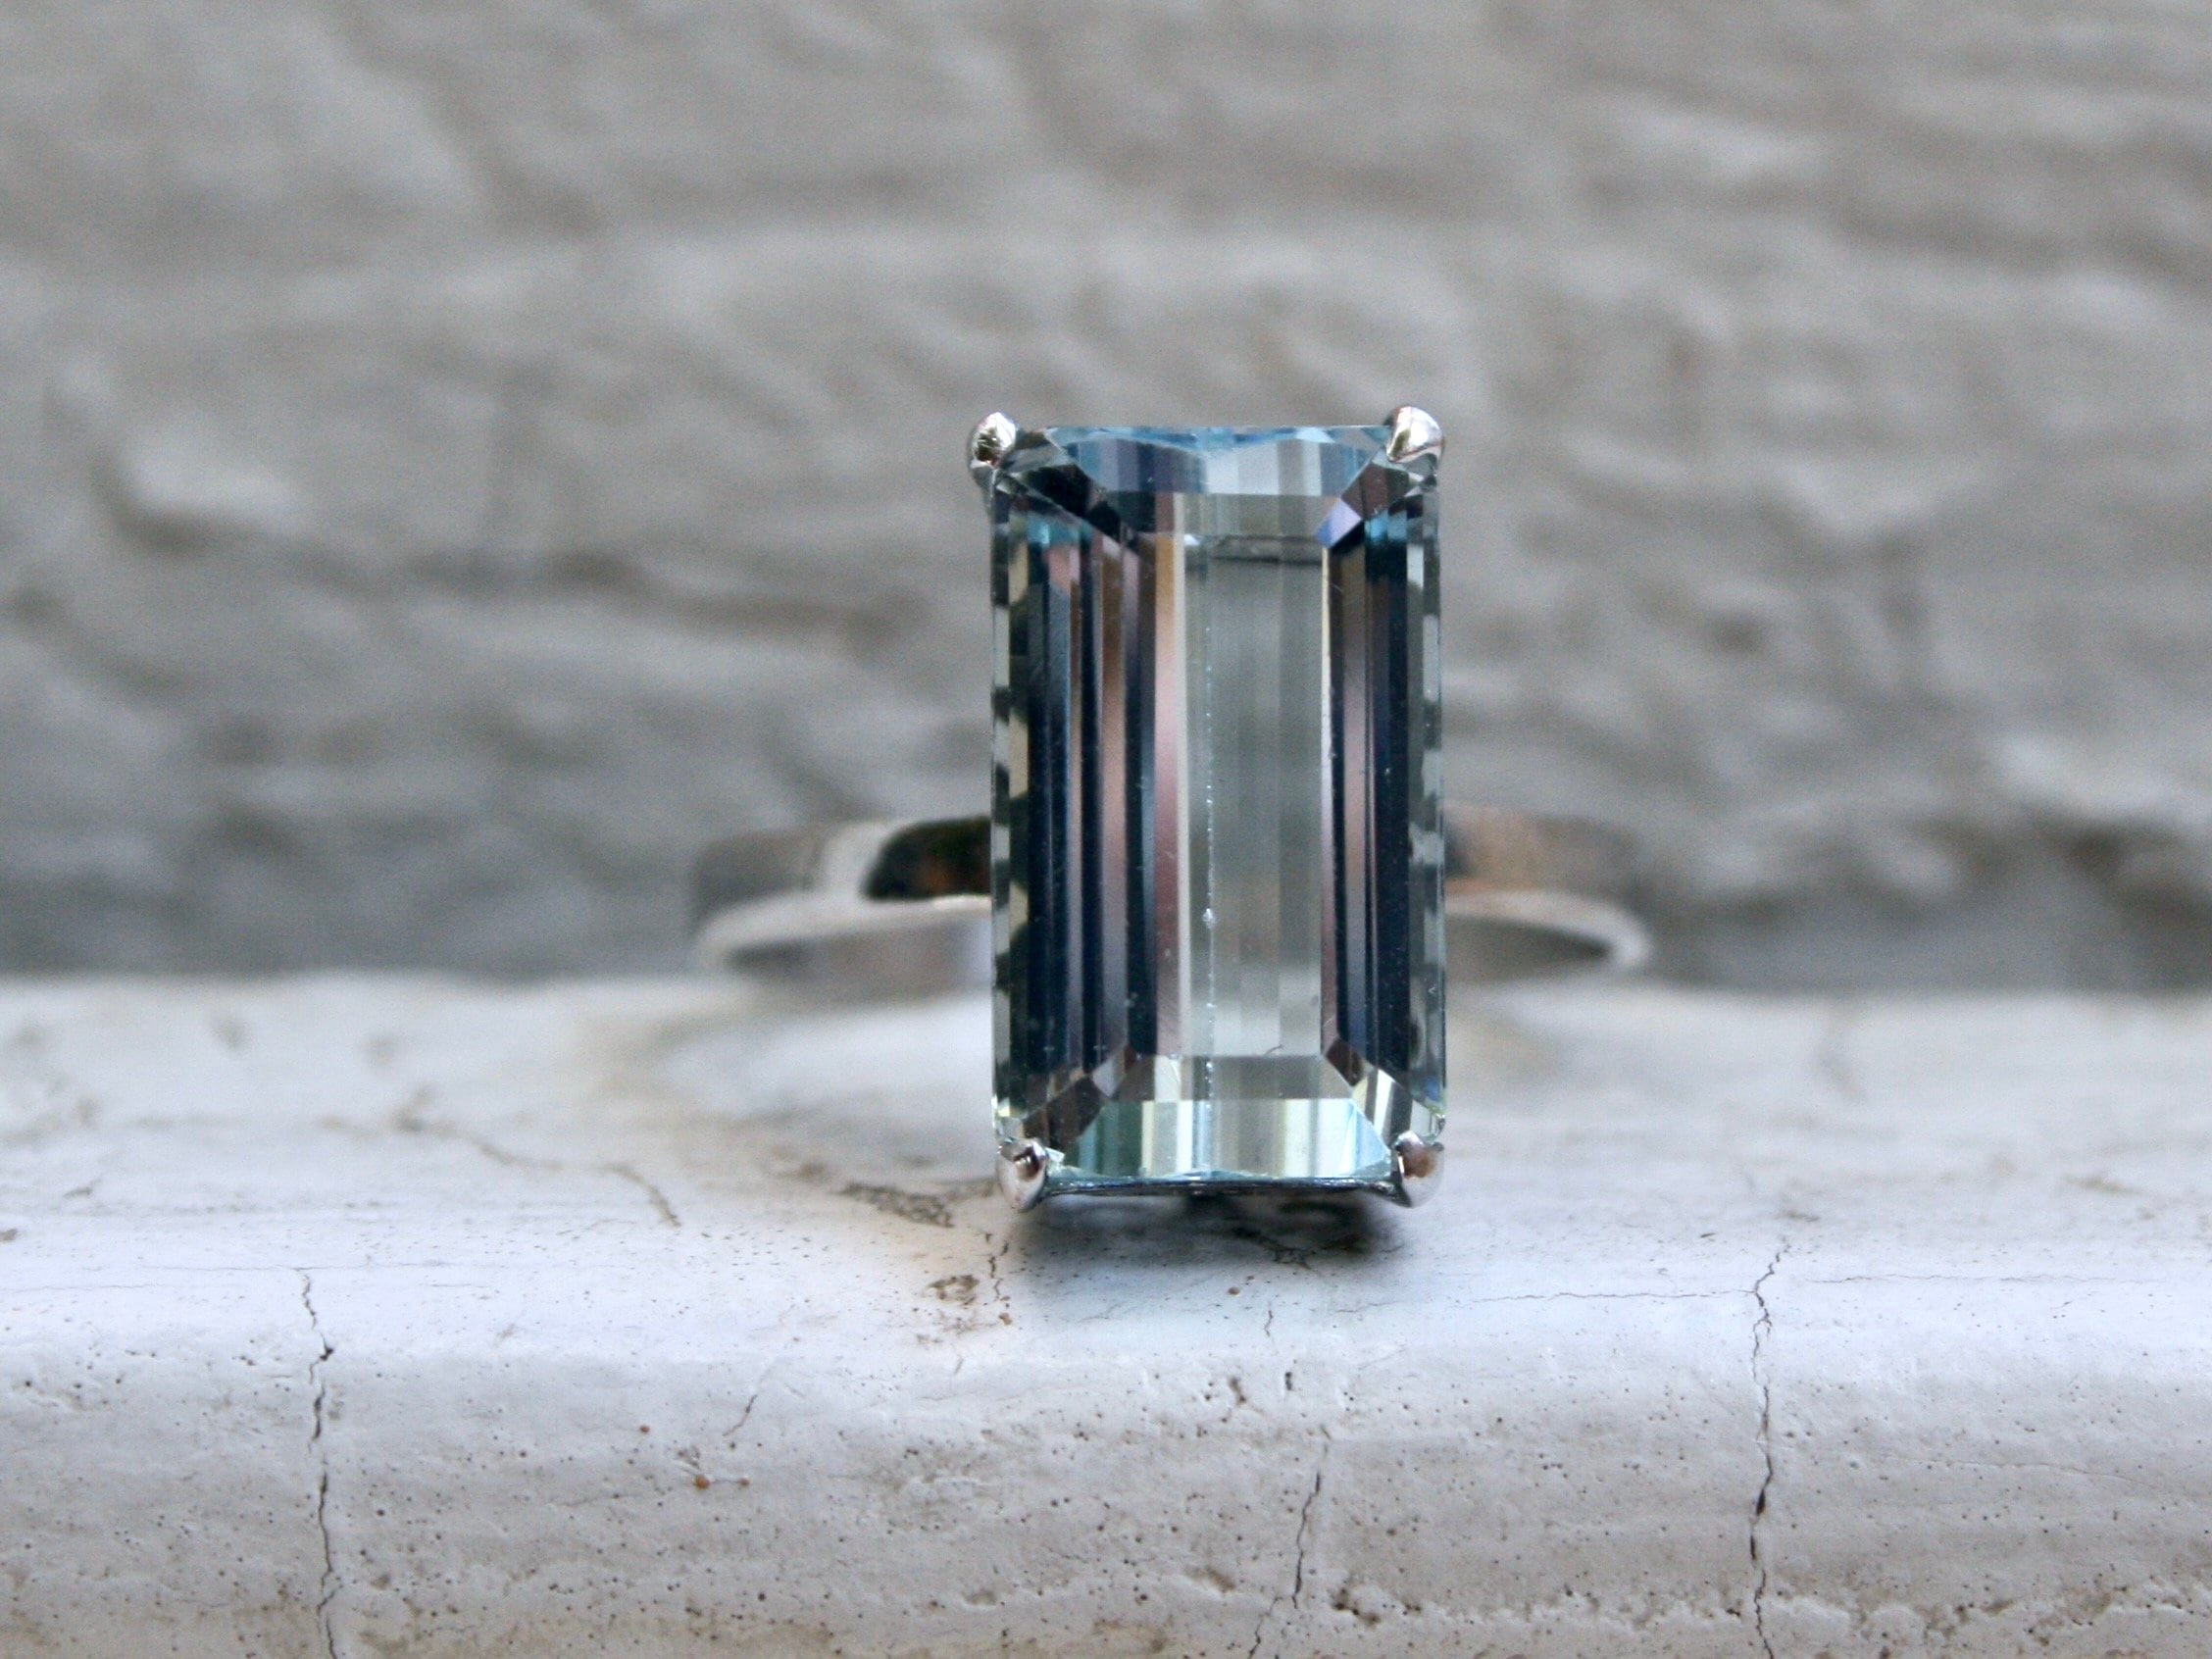 Vintage Aquamarine Solitaire Ring Engagement Ring in 18K White Gold - 6.00ct.